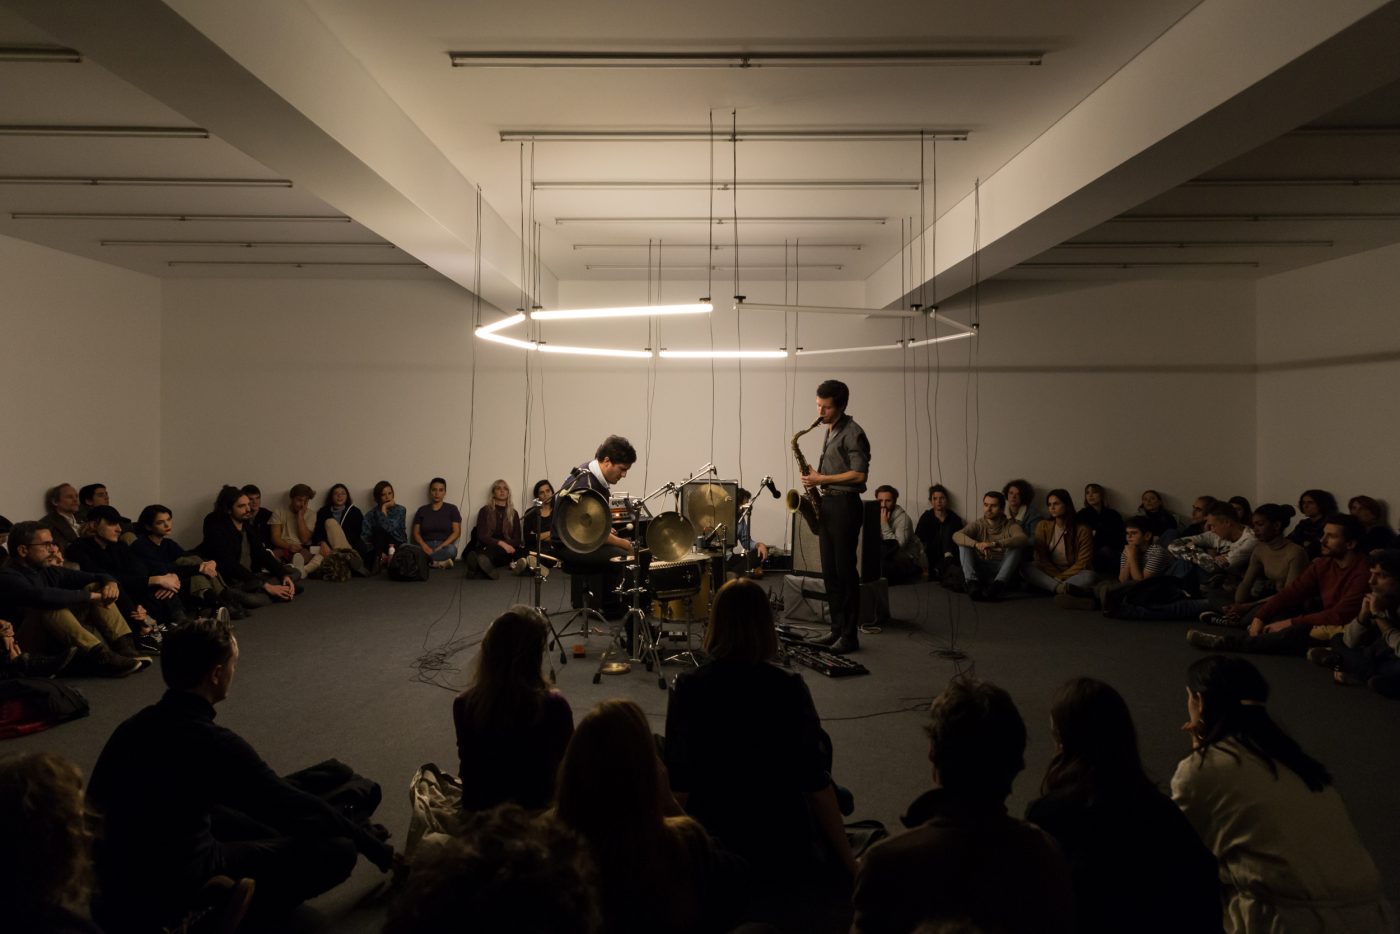 Performance / Concert by duo Gabriel Ferrandini (drums) and Pedro Sousa (saxophone). In response to and in dialogue with the installation Transverberation, by Nuno da Luz
